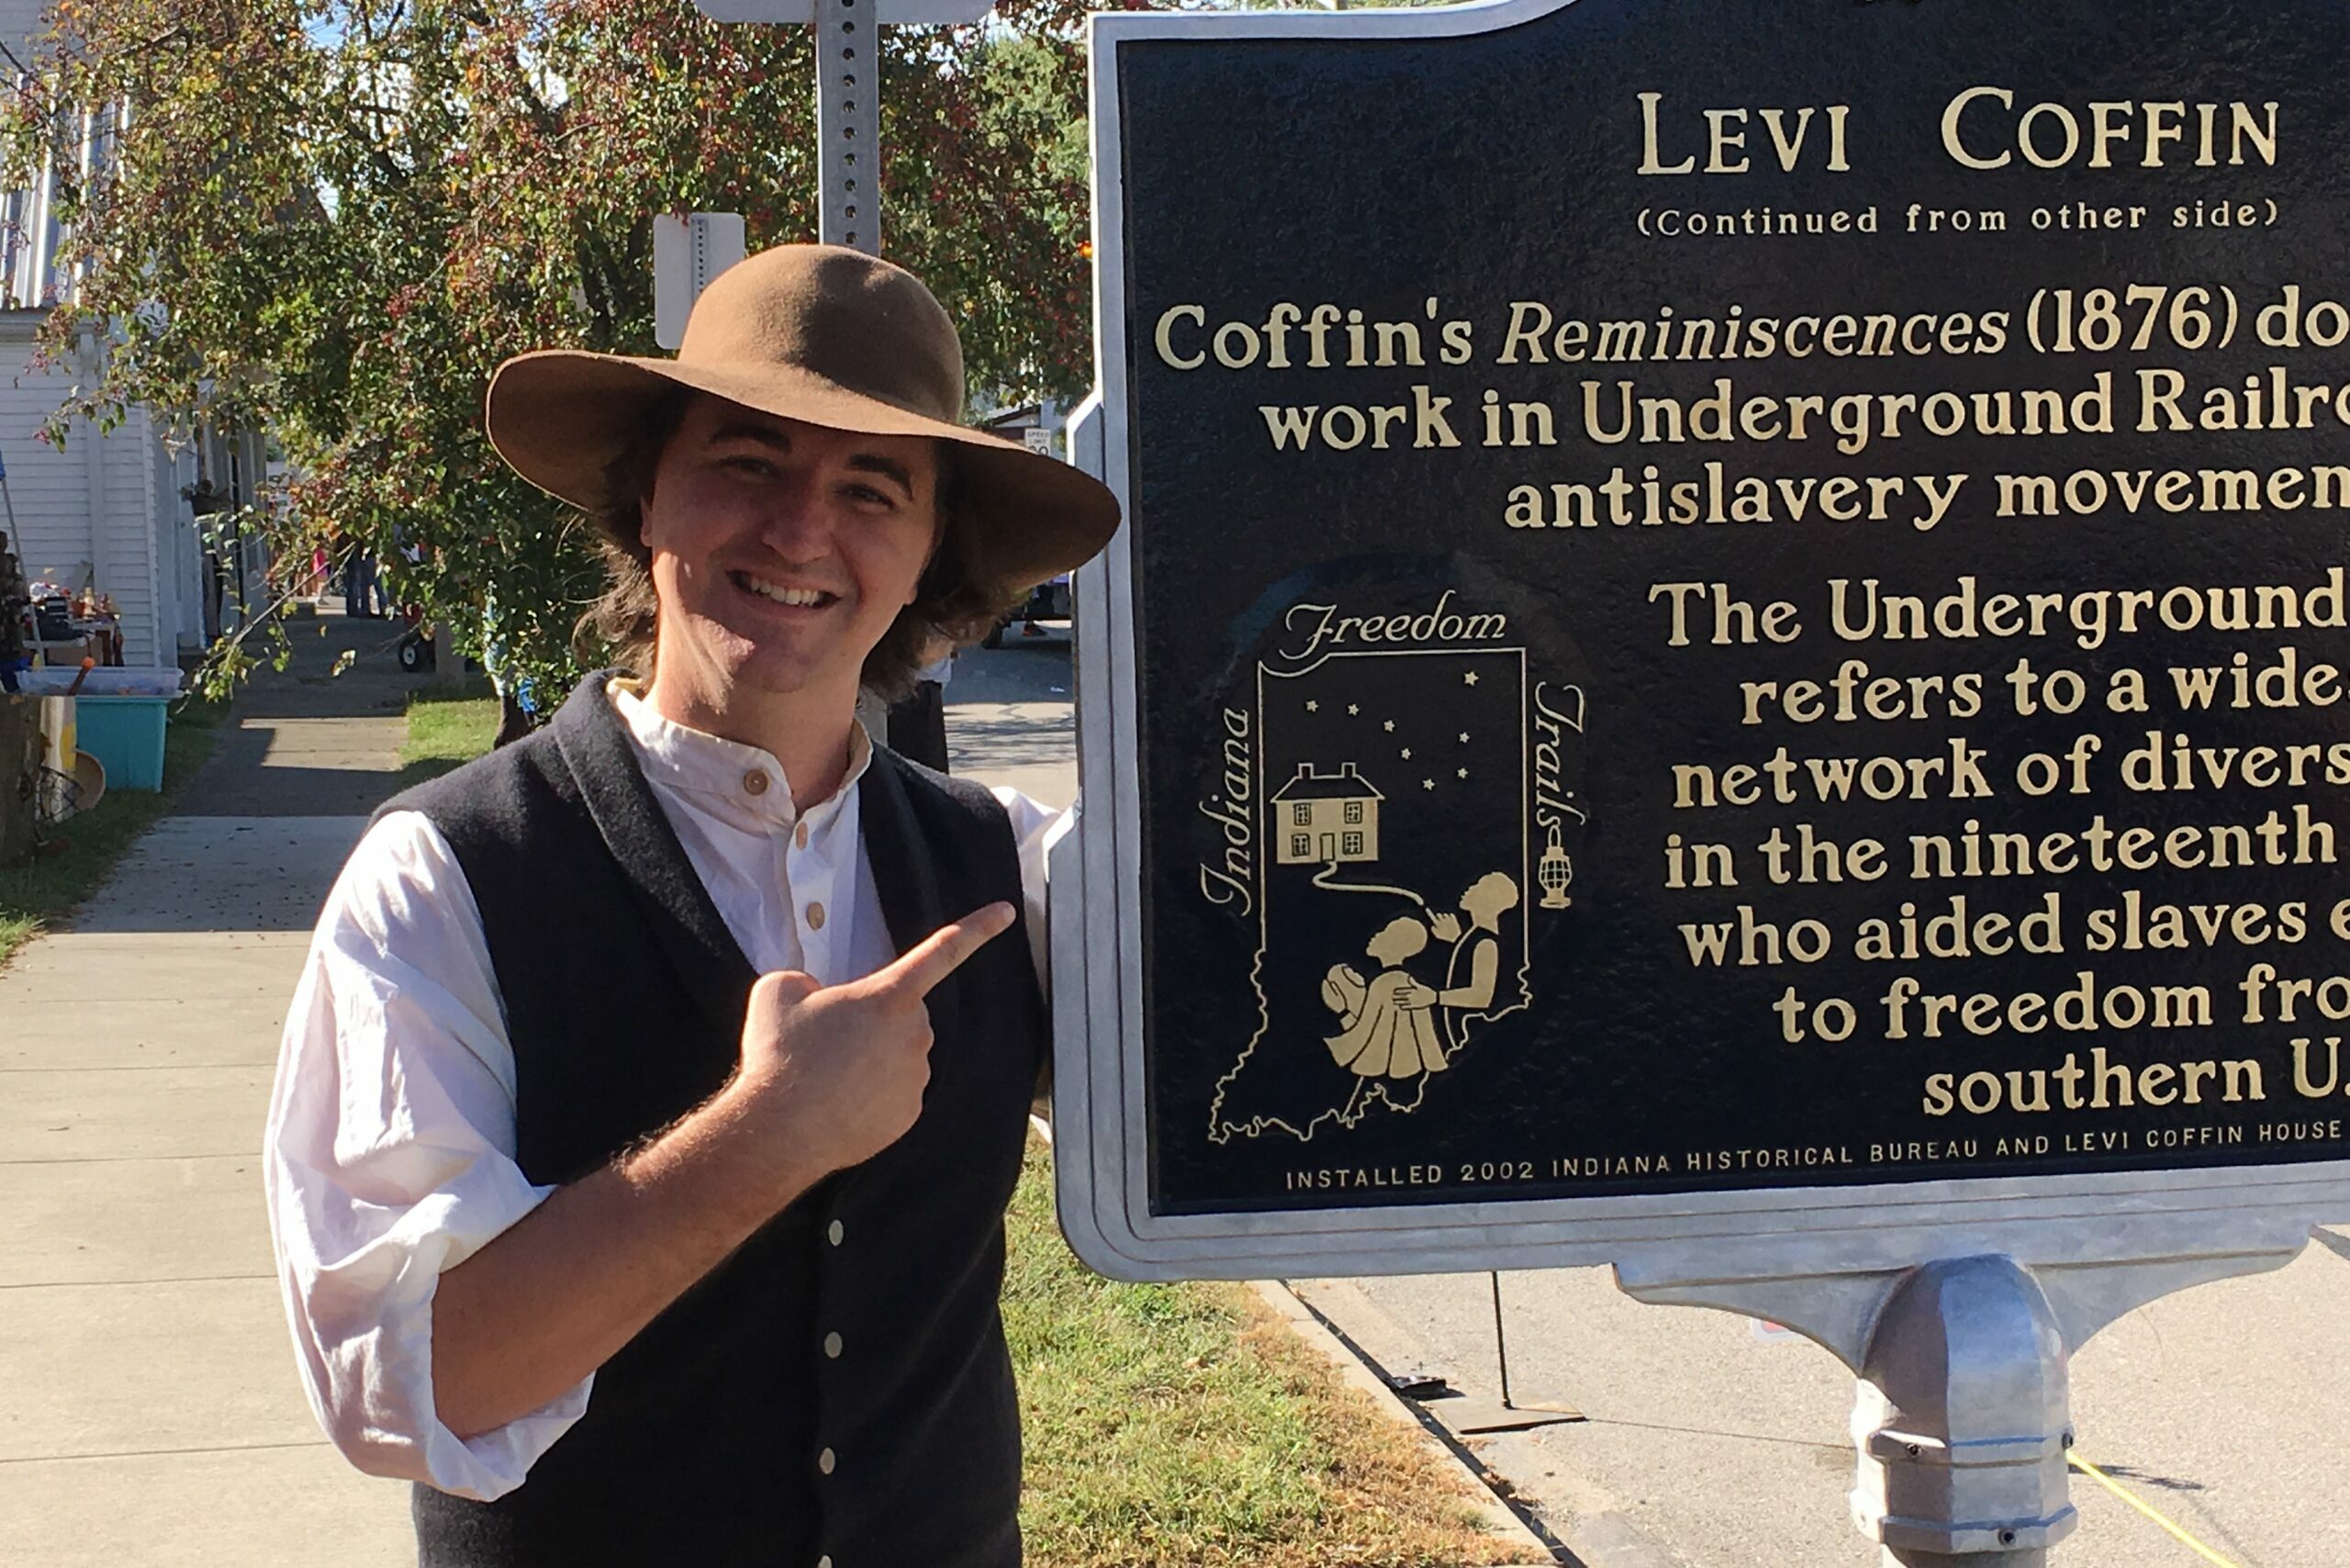 levi coffin interpreter pointing at historical levi coffin sign